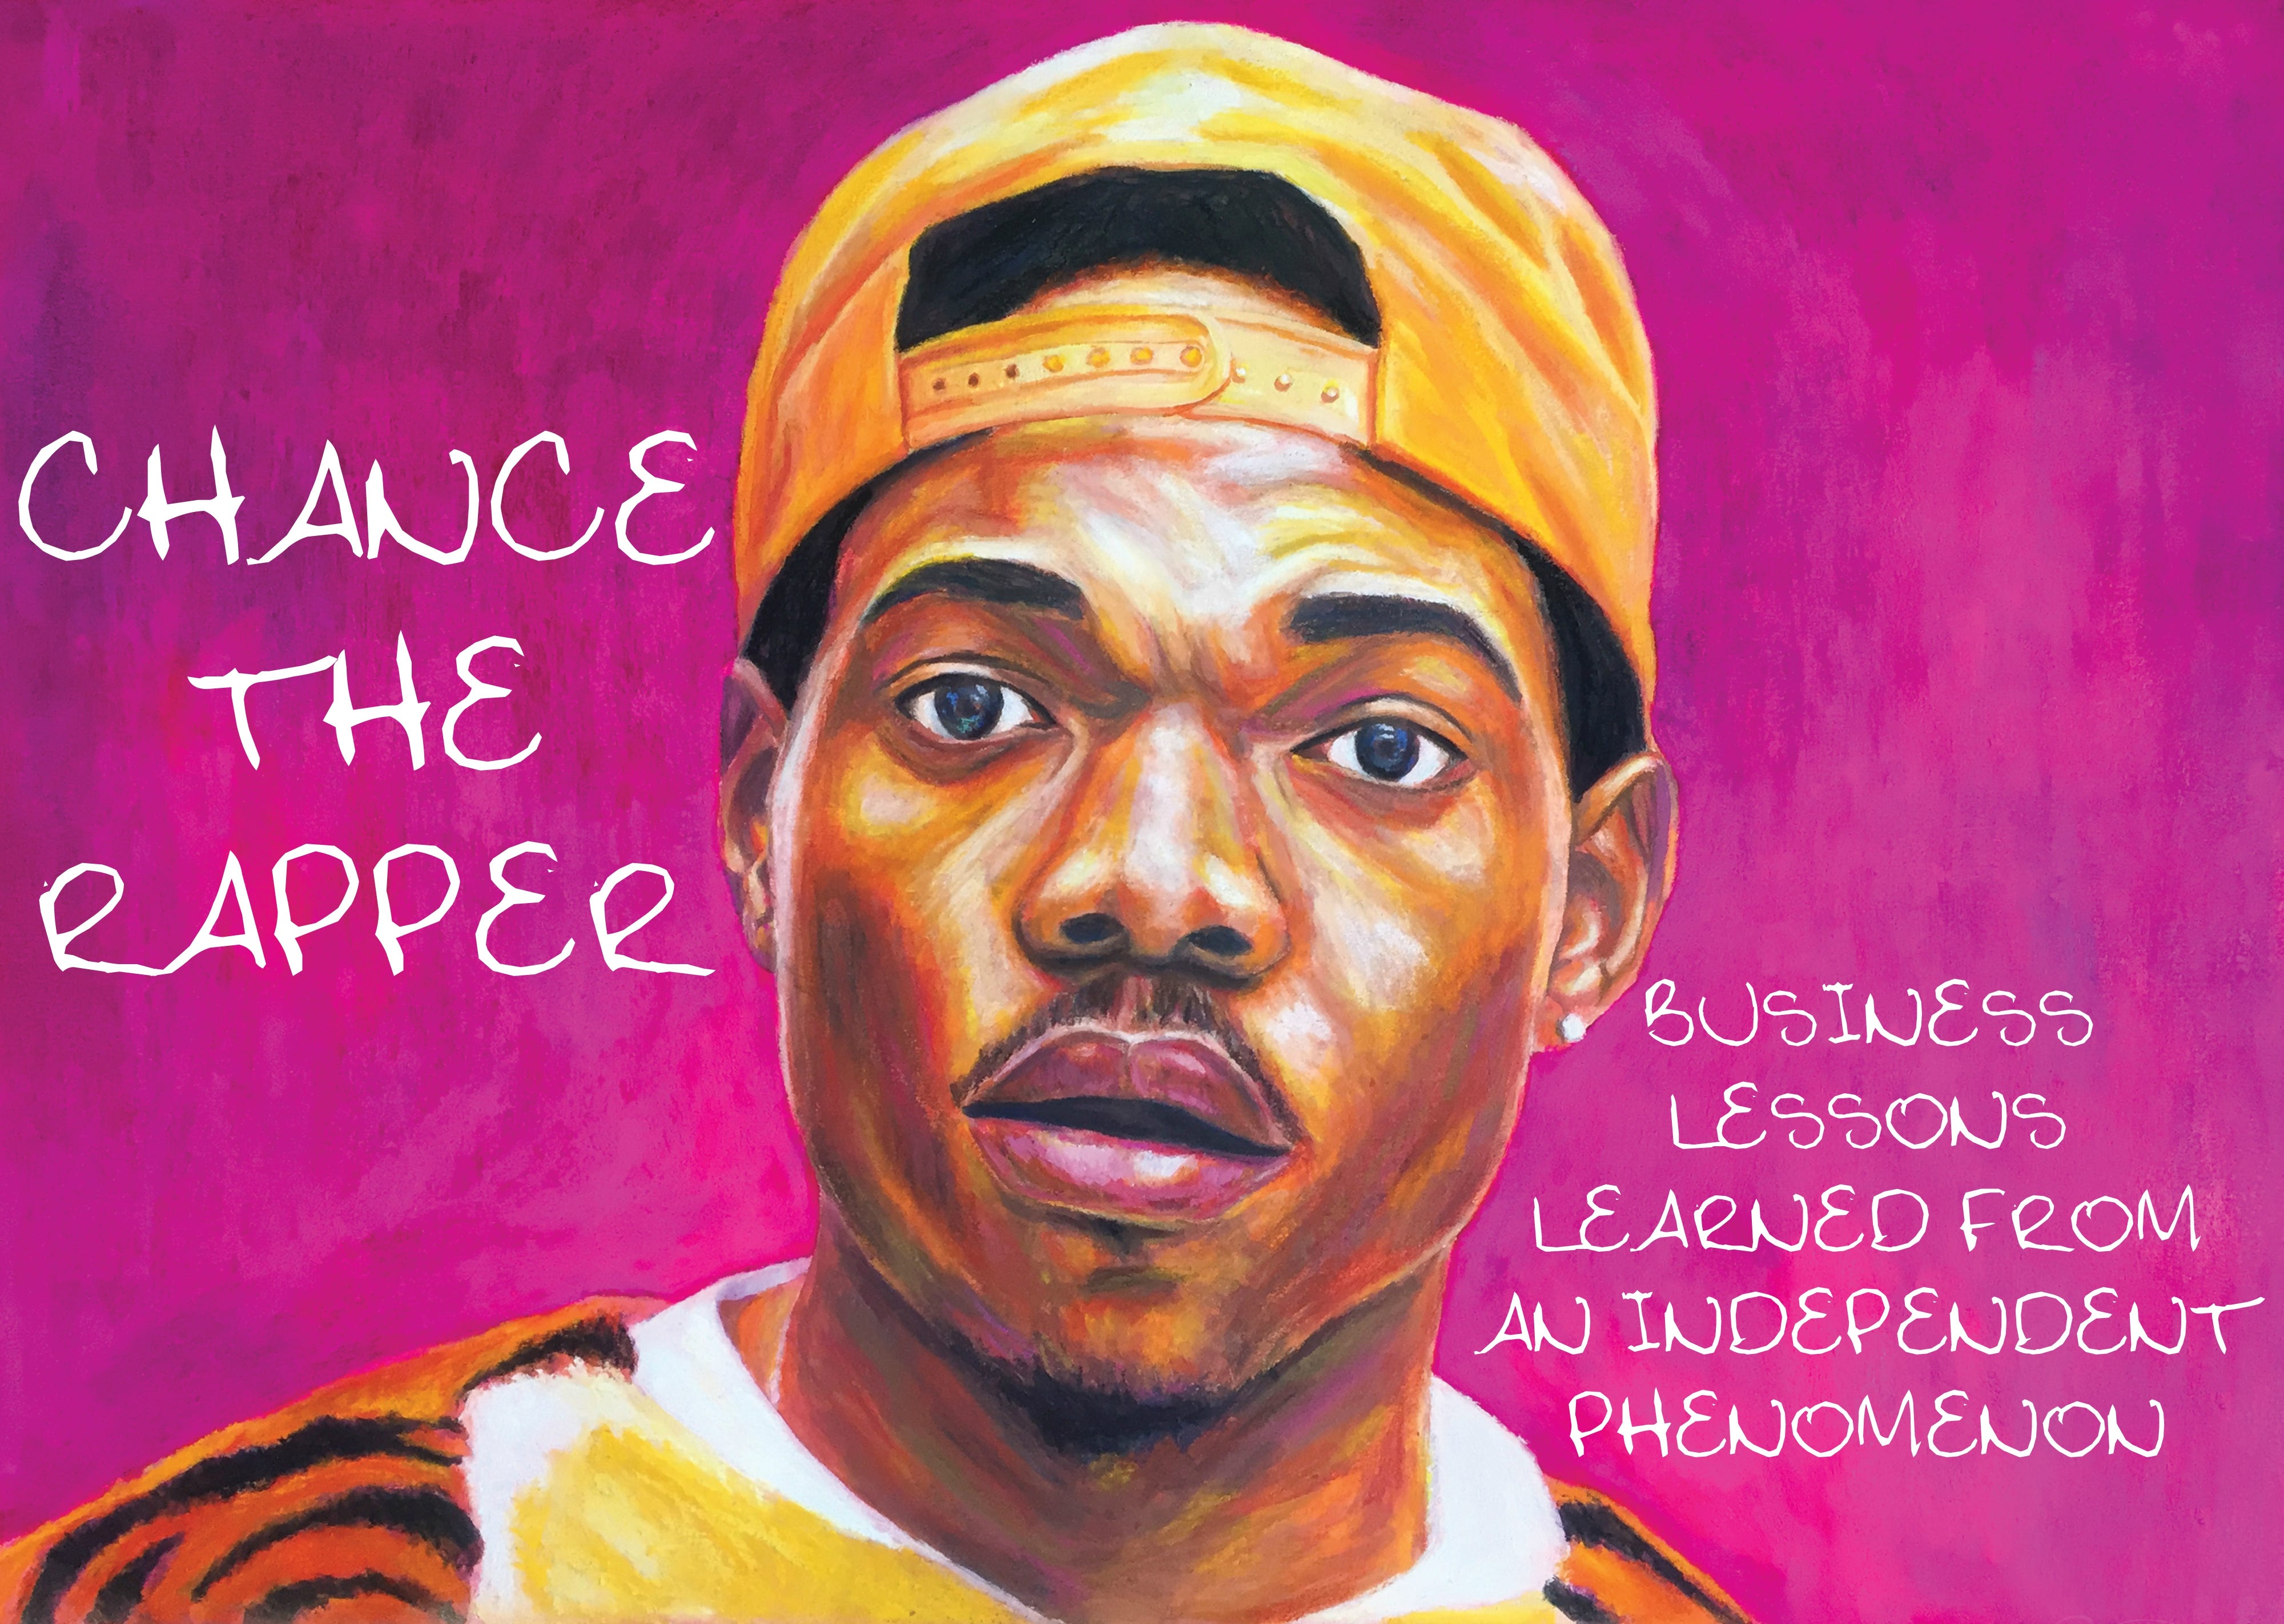 Download Chance The Rapper Business Lessons Learned From An Independent Phenomenon By Ben Snively Medium